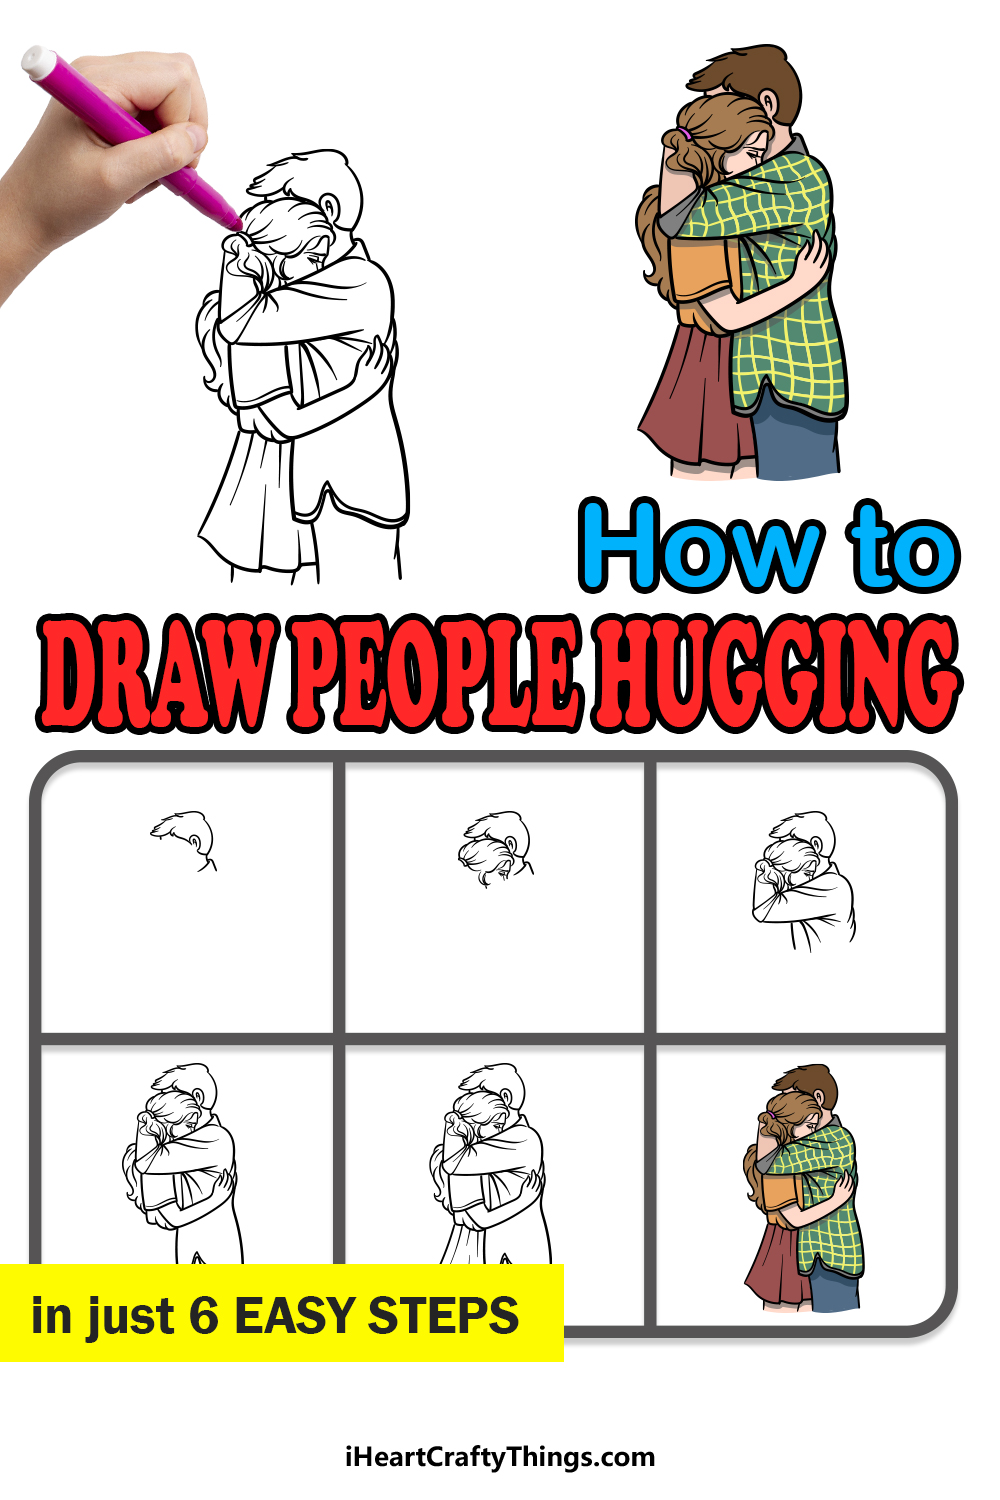 how to draw people hugging in 6 easy steps